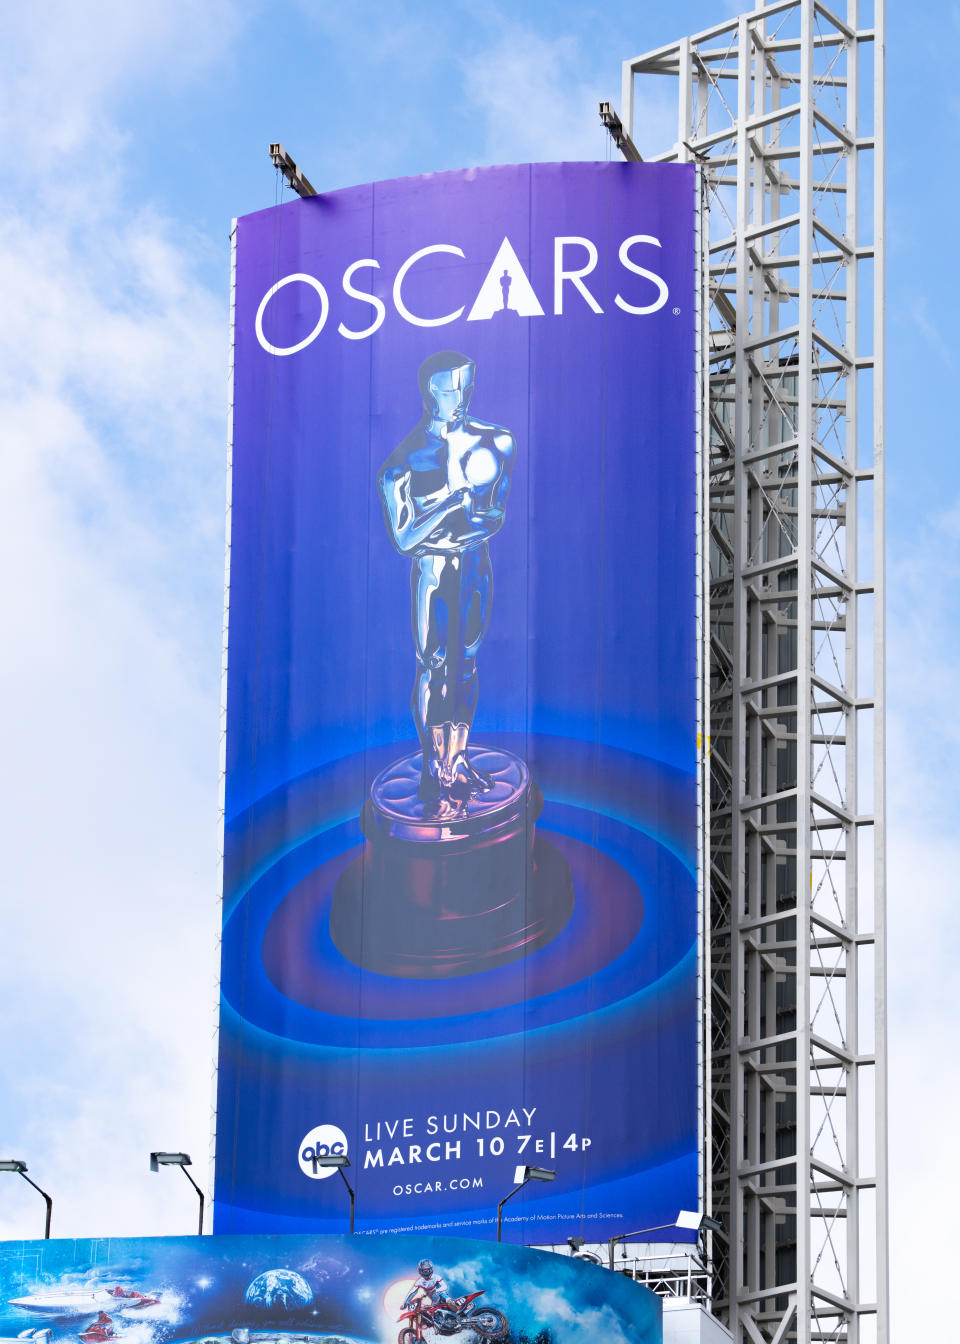 Oscars advertisement banner featuring the iconic statuette, date, and broadcast information